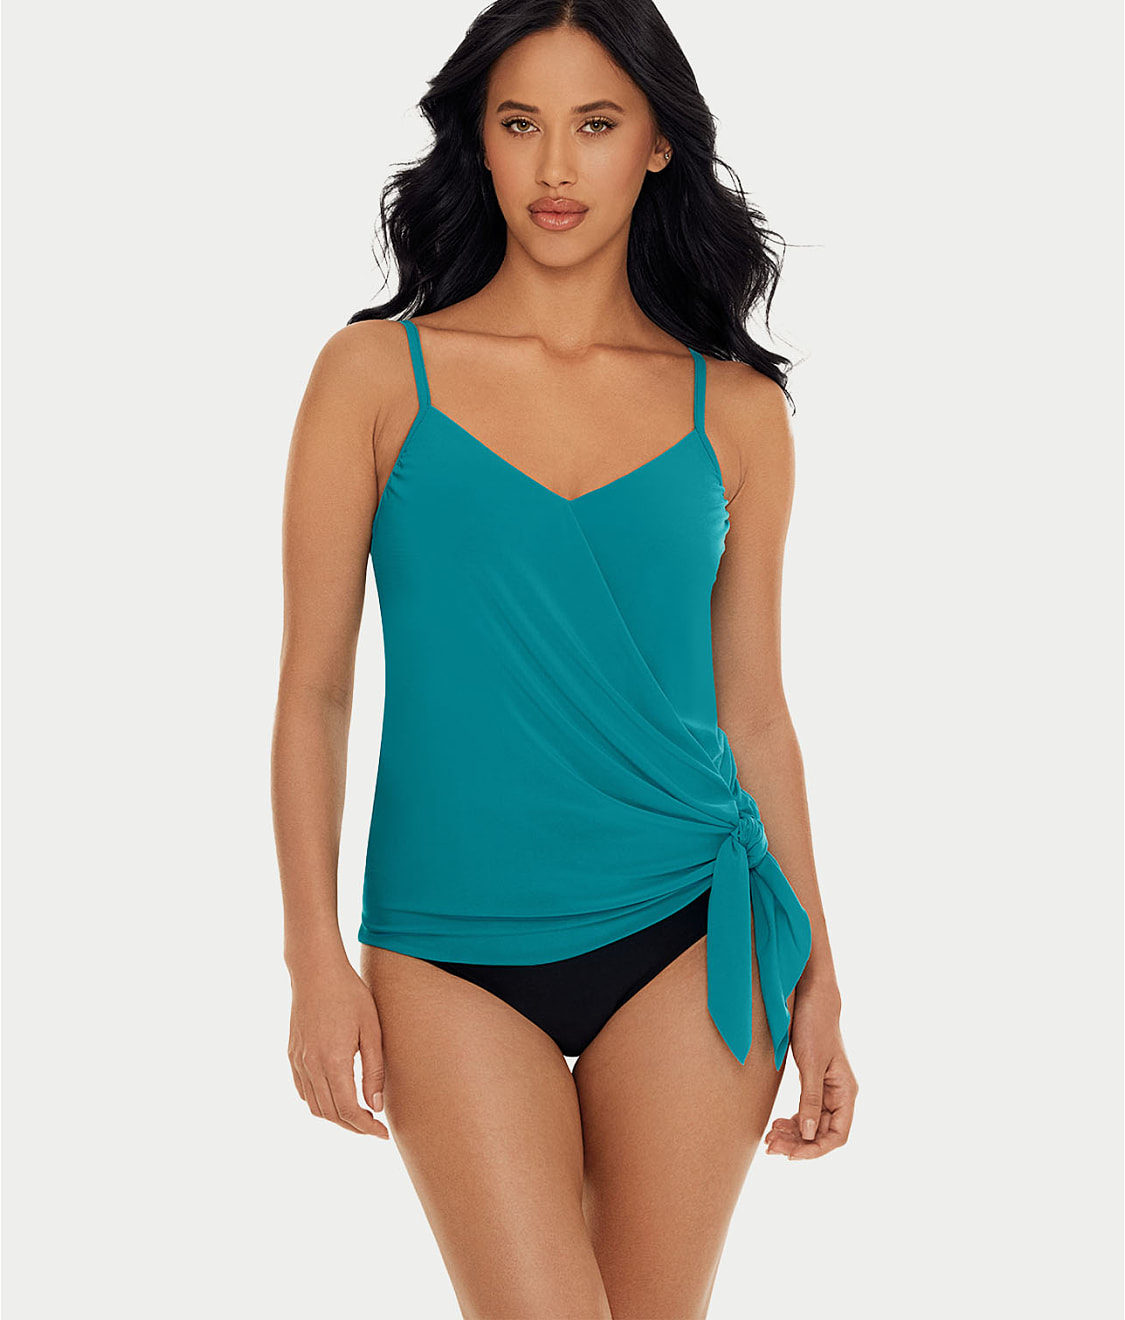 Slimming swimsuit with mesh stripes - Magic Hands Boutique